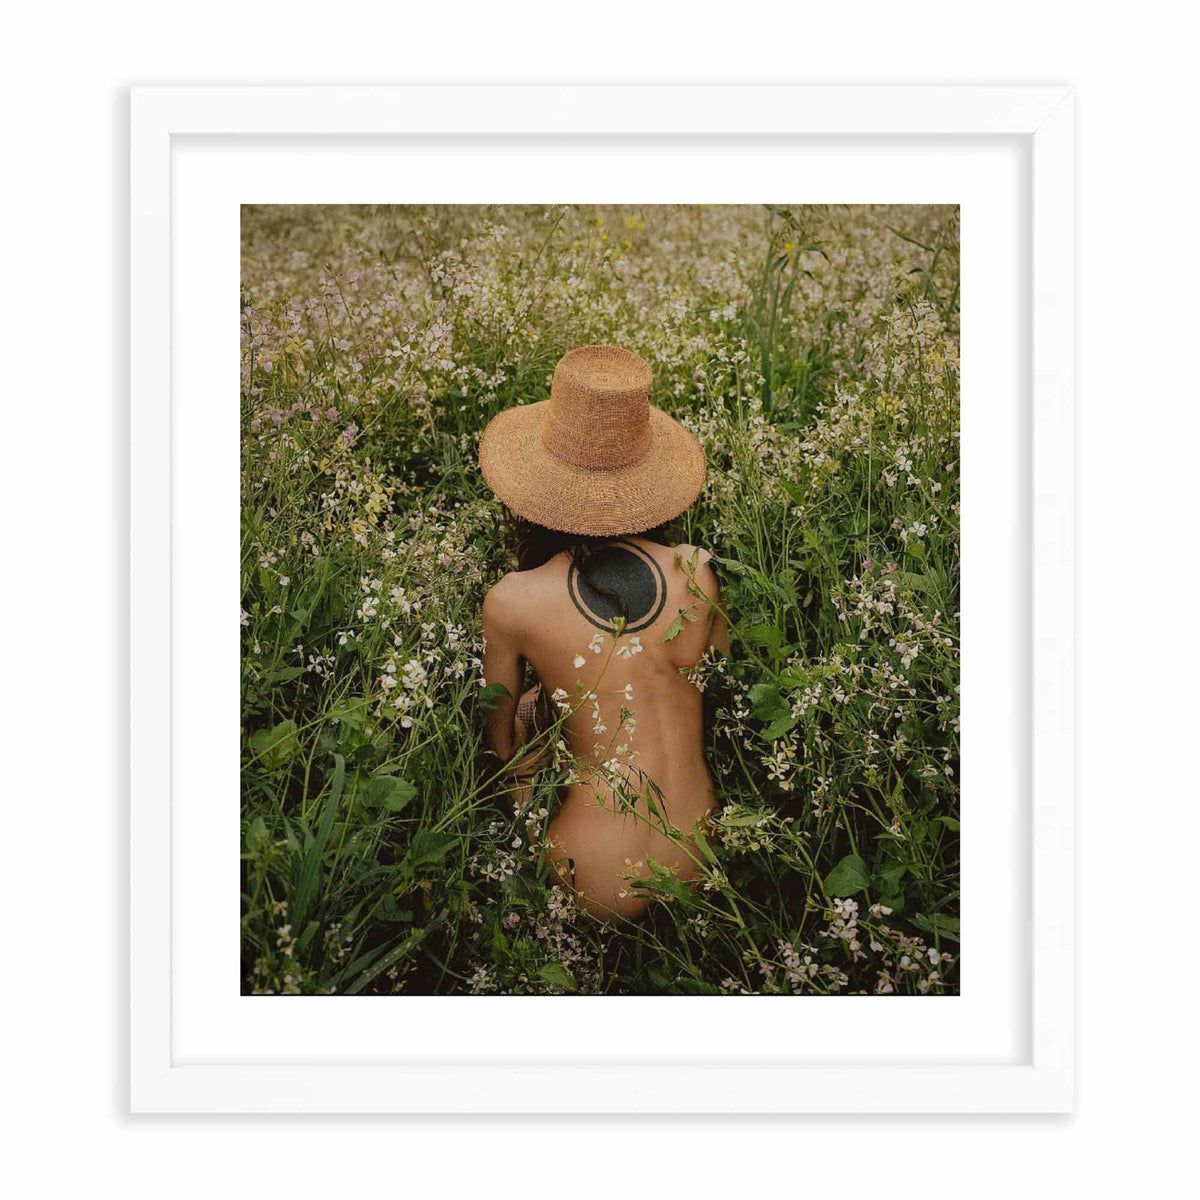 talia in spring - limited edition print